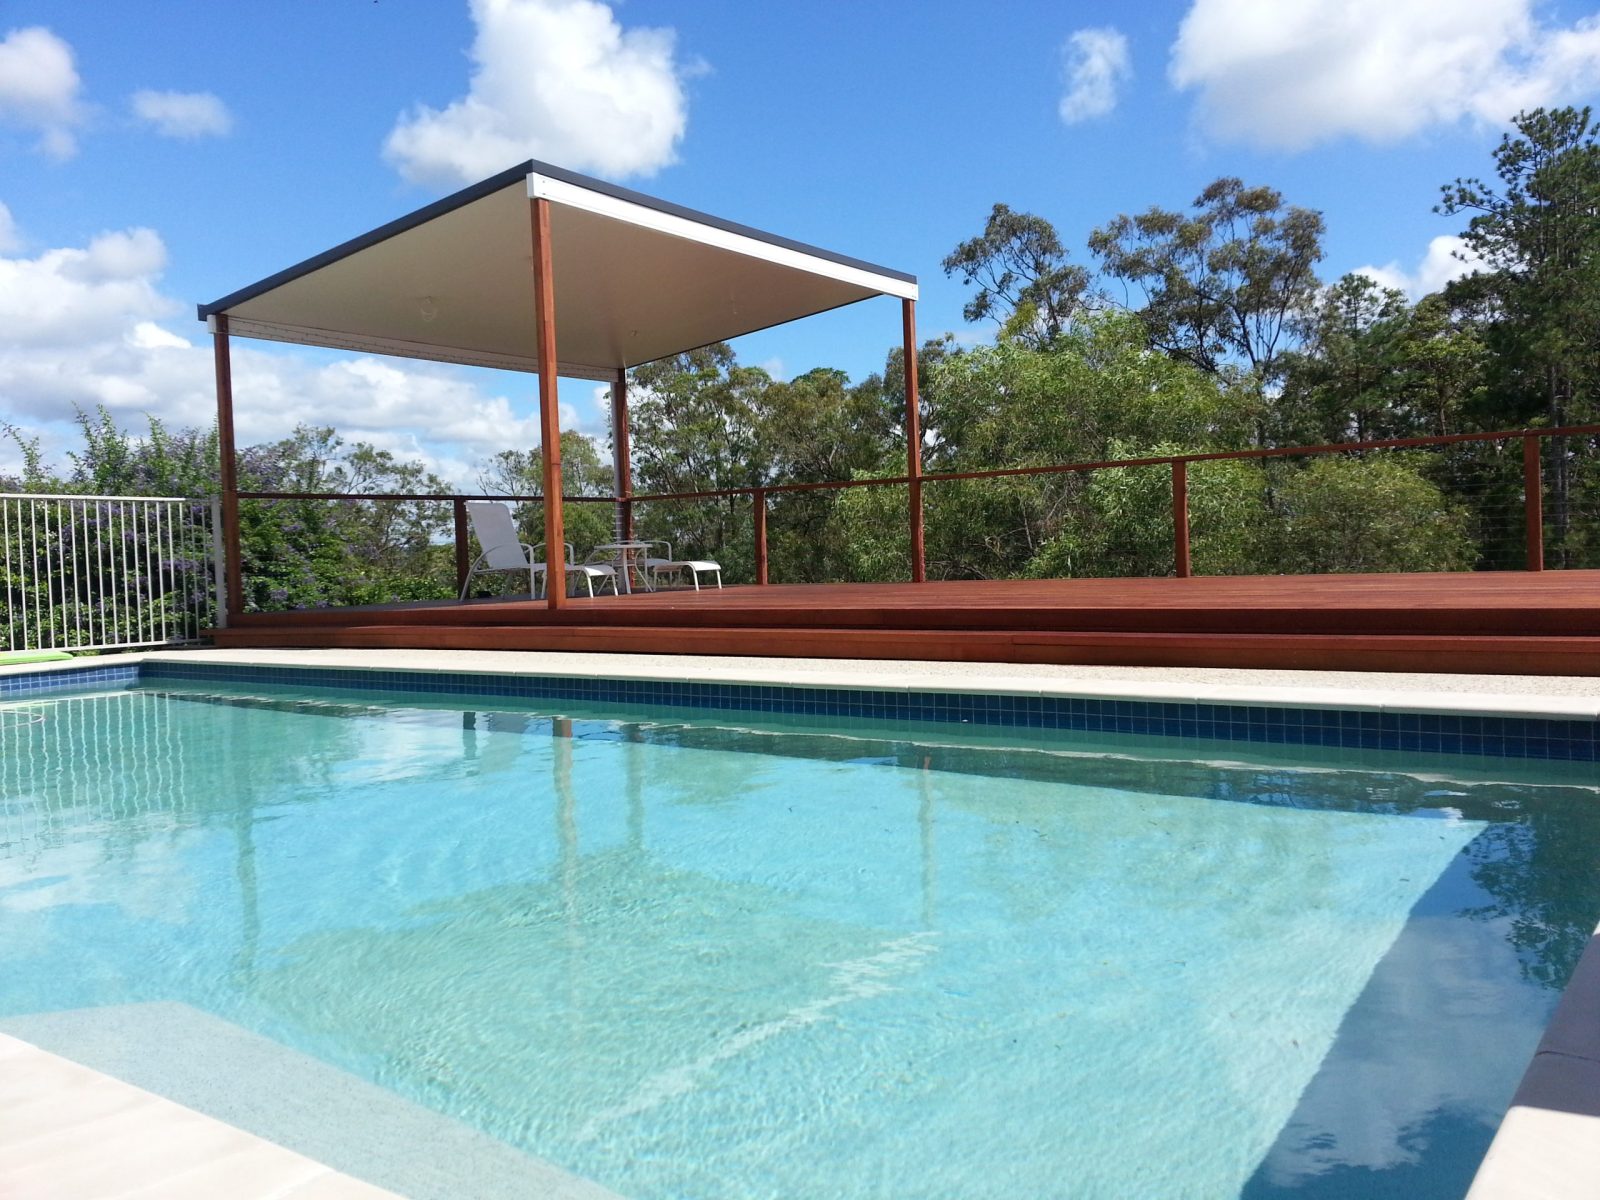 Decking pool area